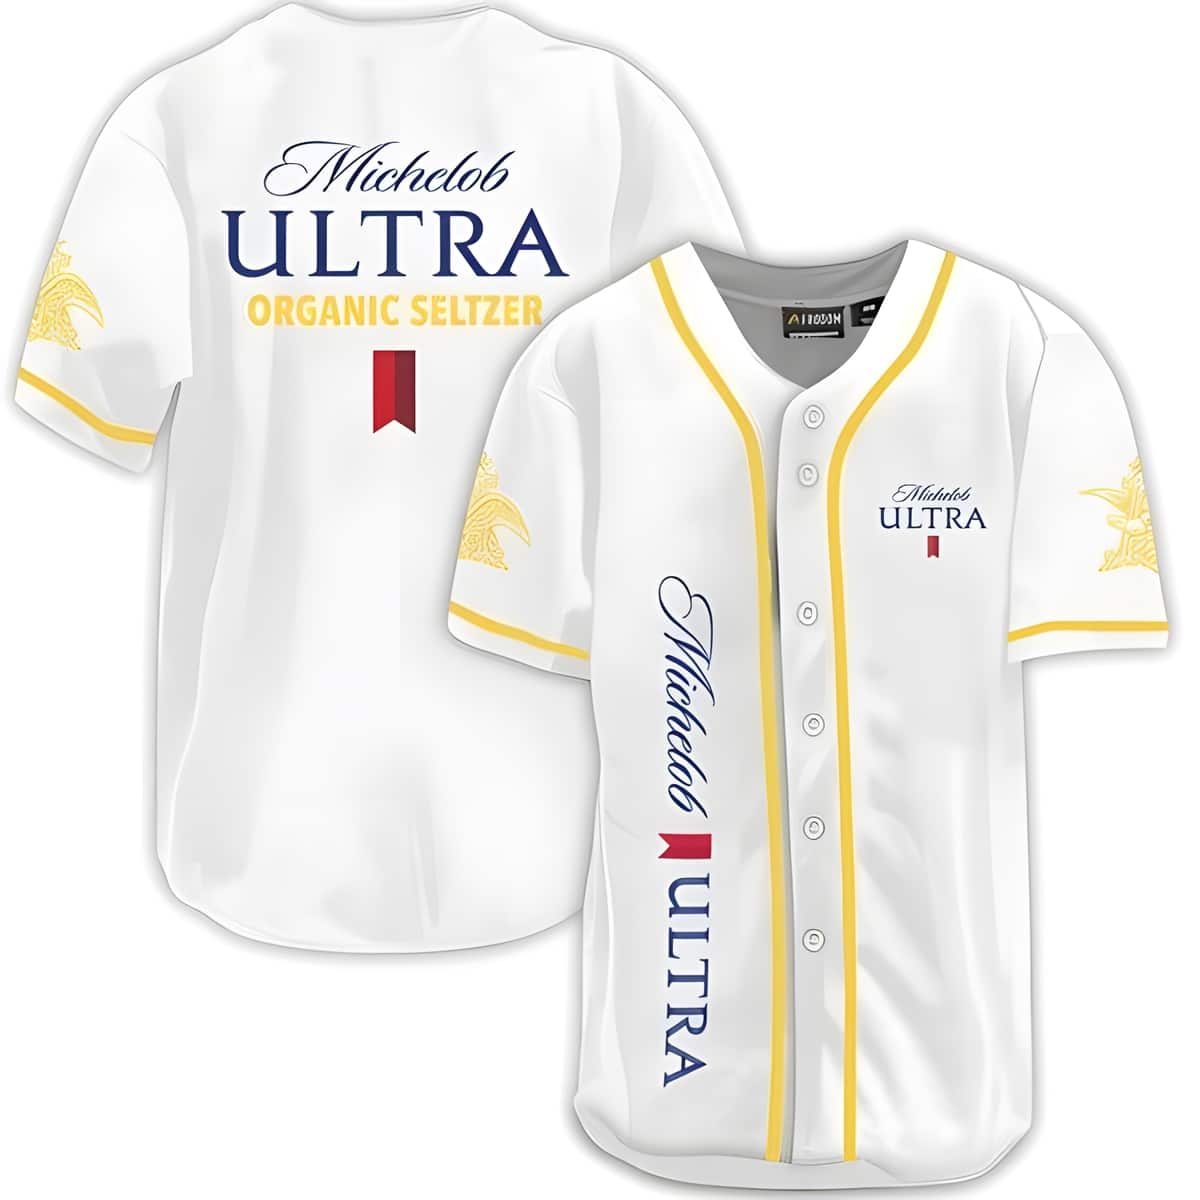 Basic Michelob ULTRA Baseball Jersey Organic Seltzer Spicy Pineapple Beer Gift For Family